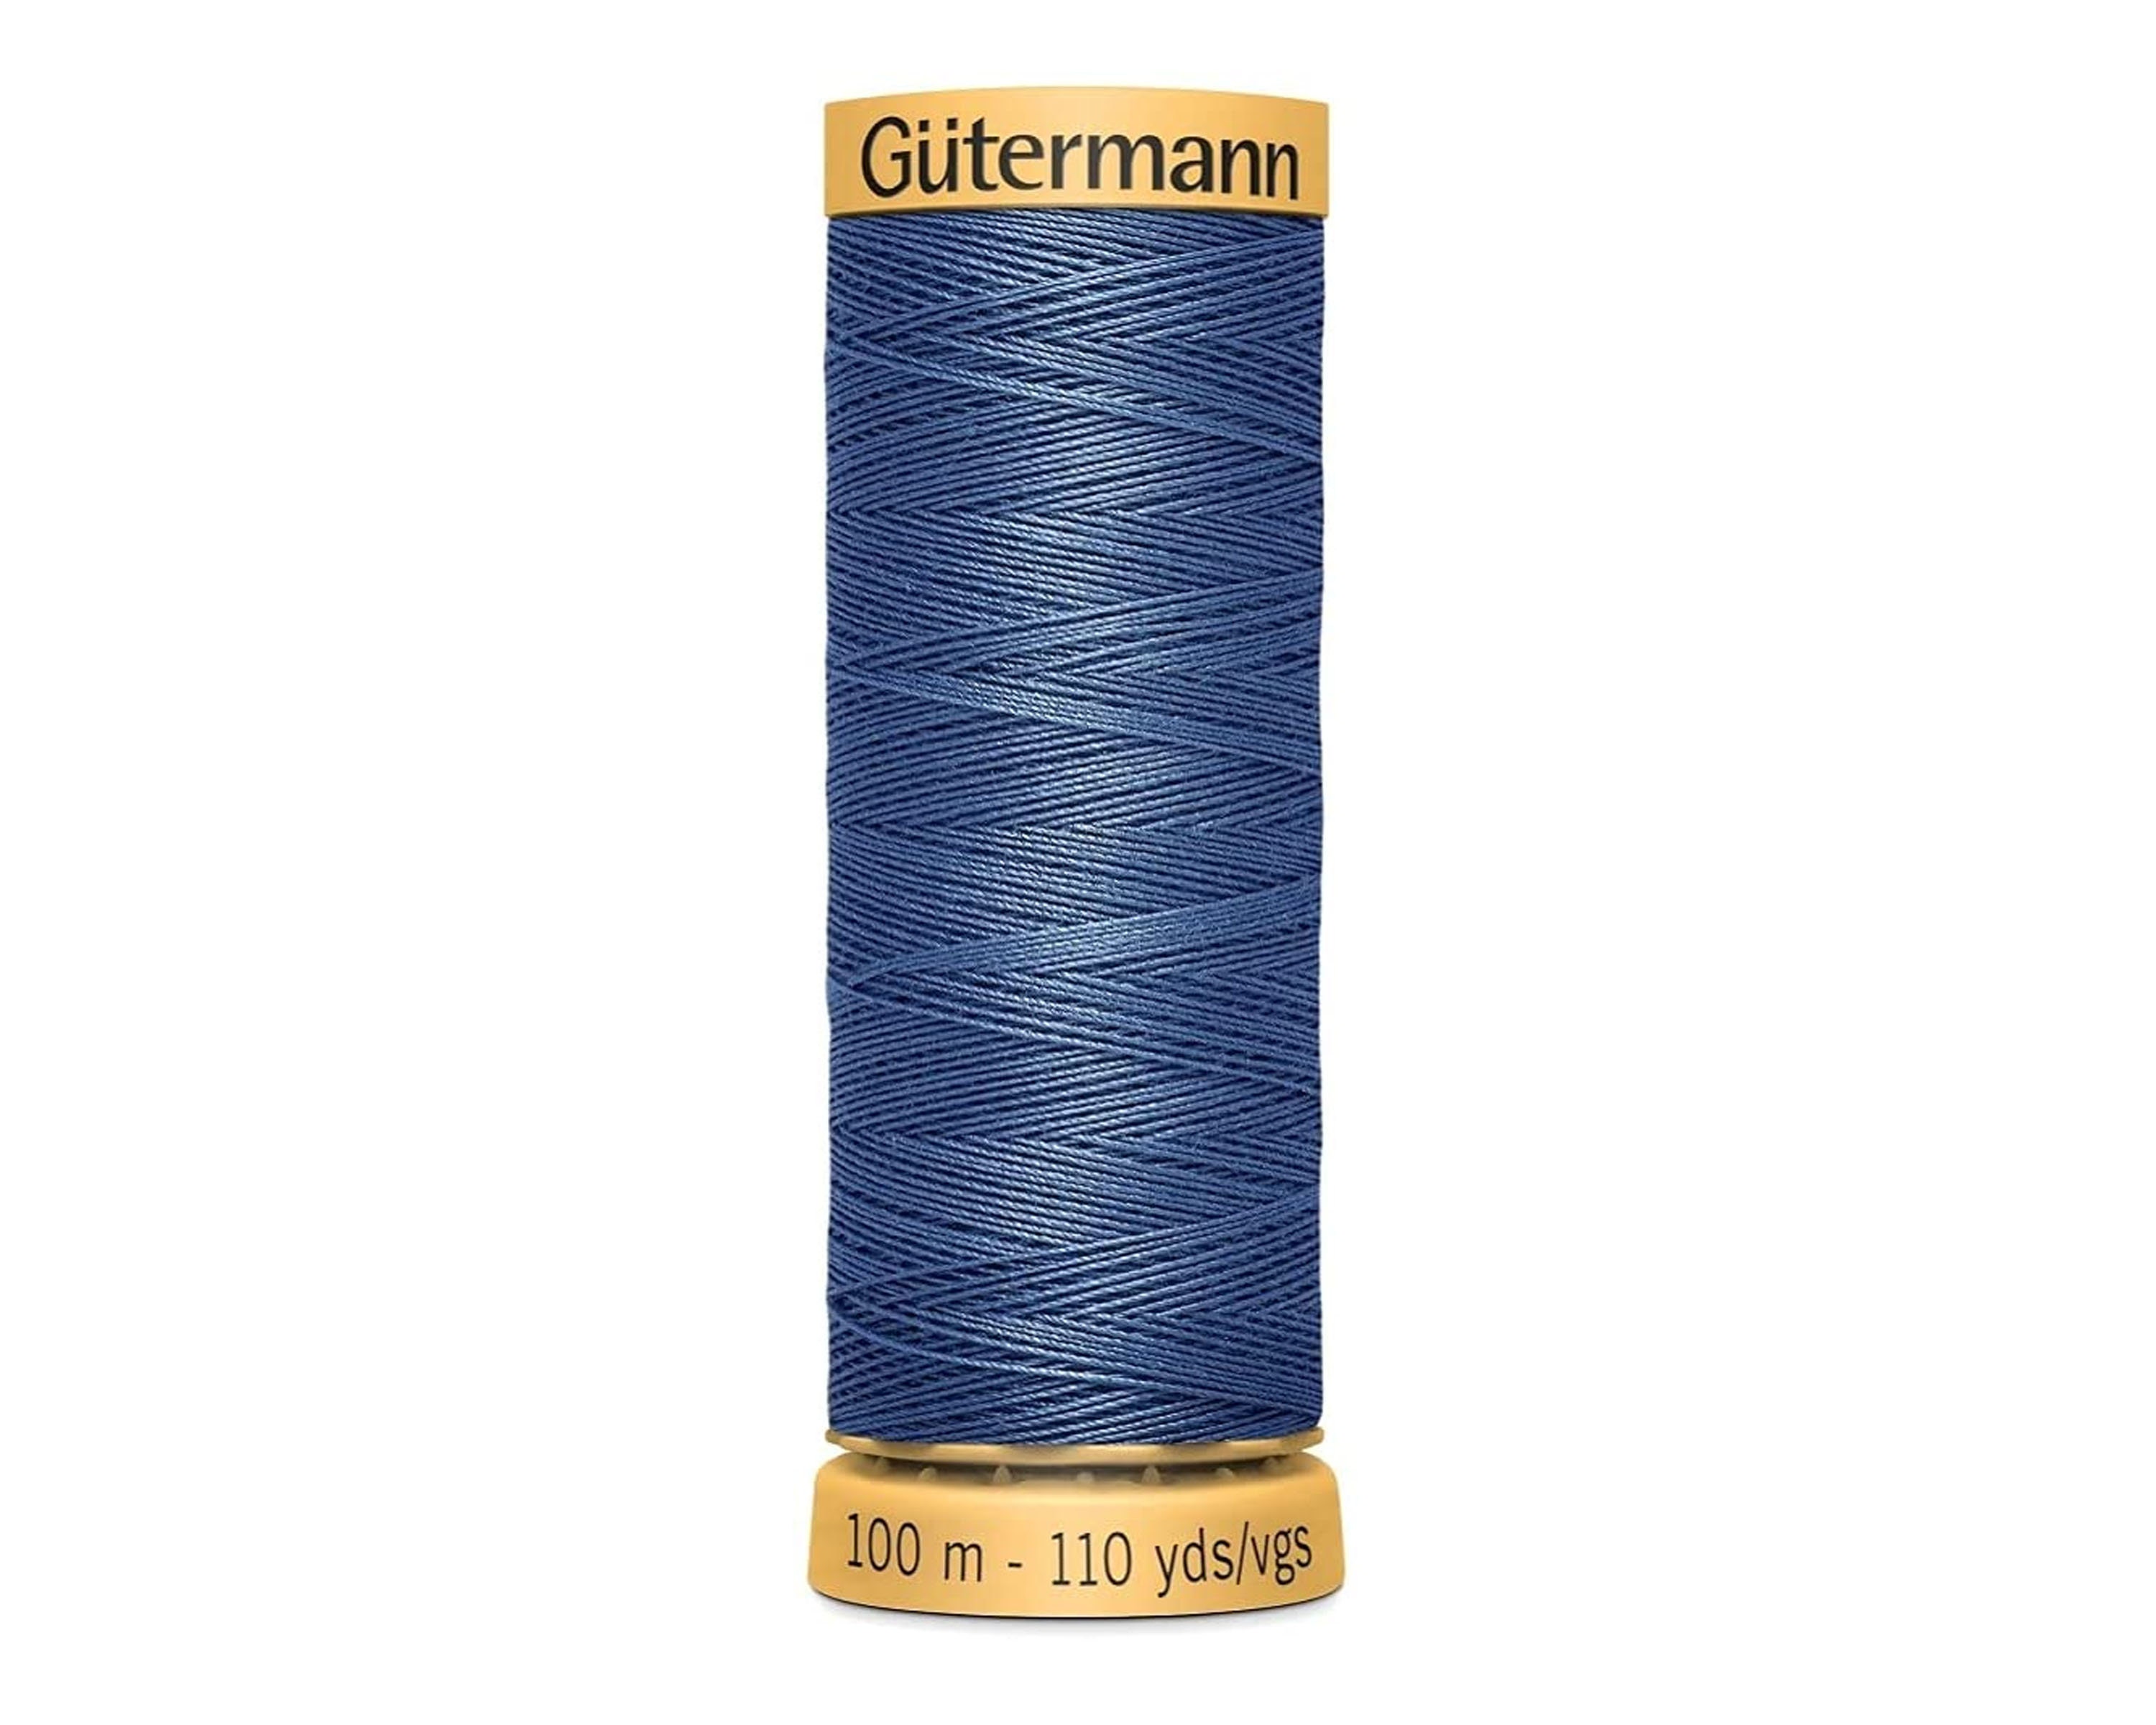 100 Cotton Thread for Sewing, 100 Cotton Sewing Machine Thread